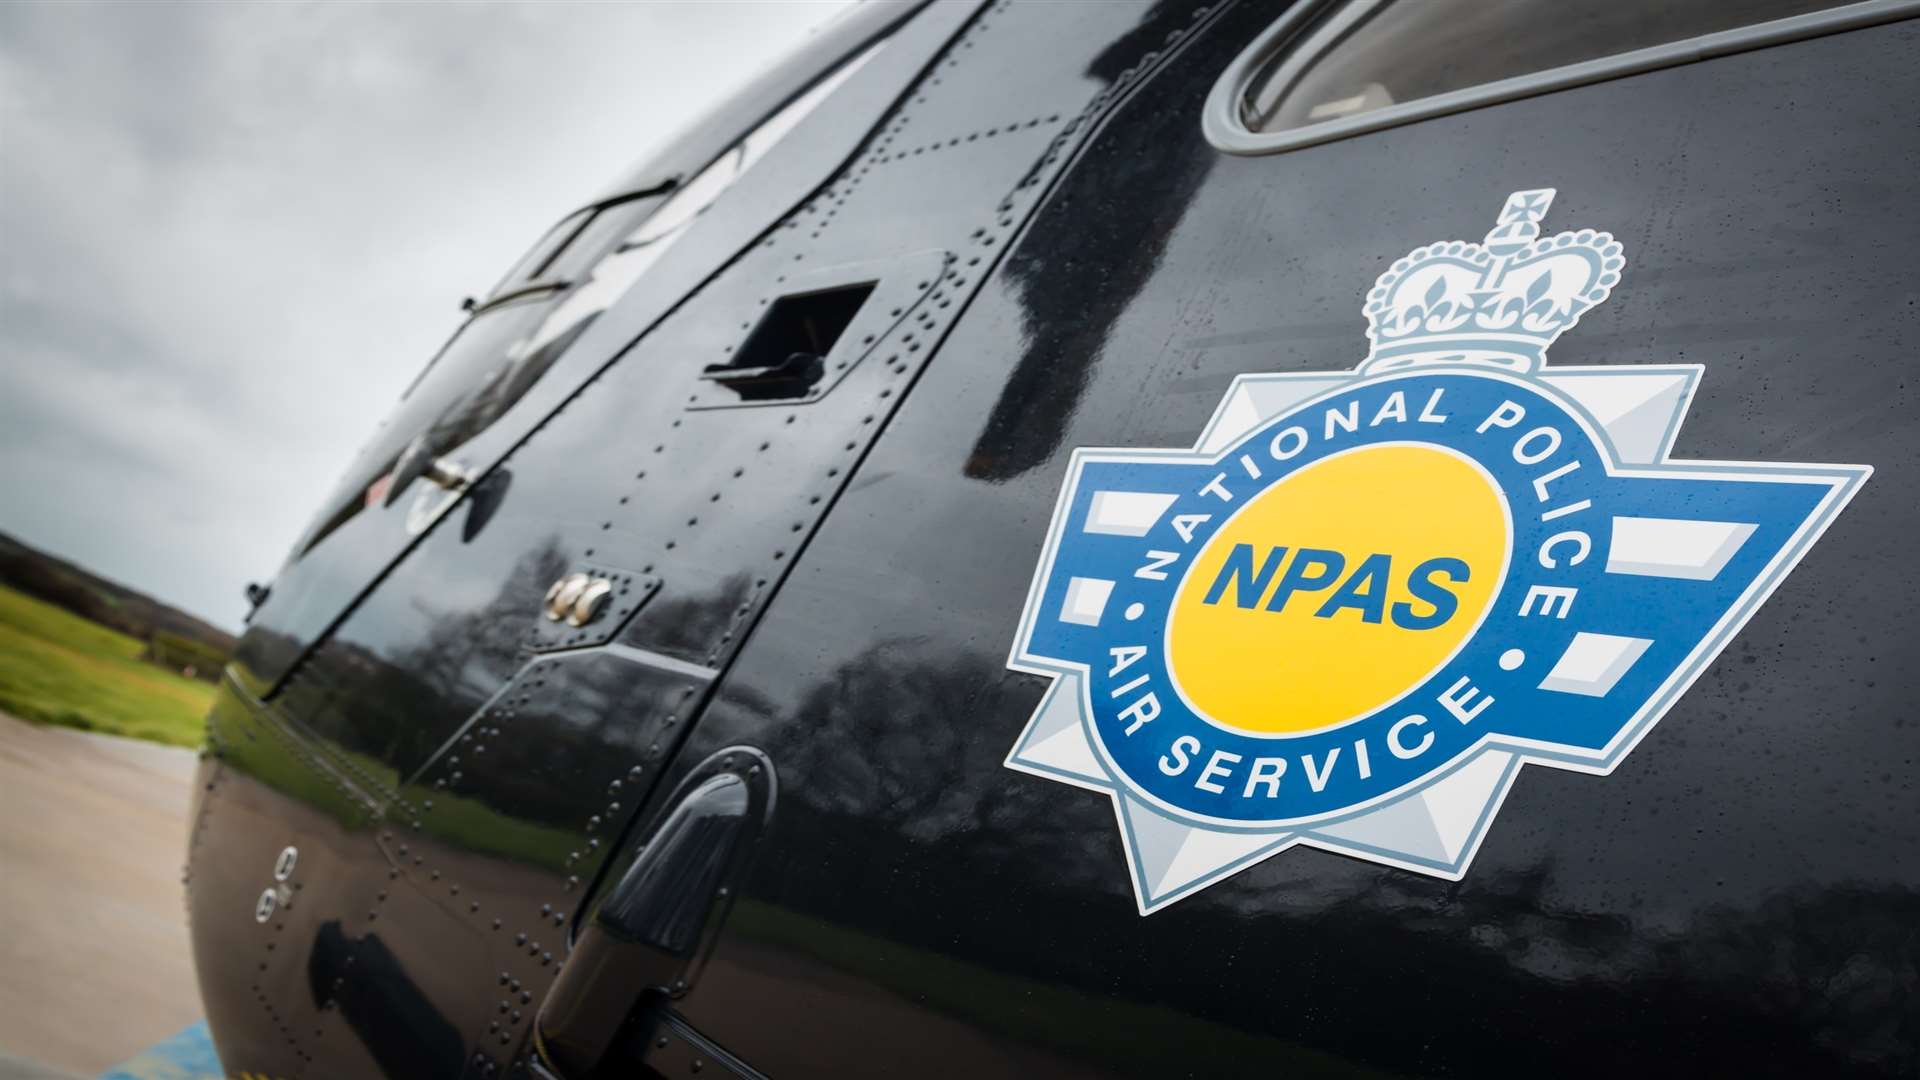 Police helicopters are operated by the National Police Air Service